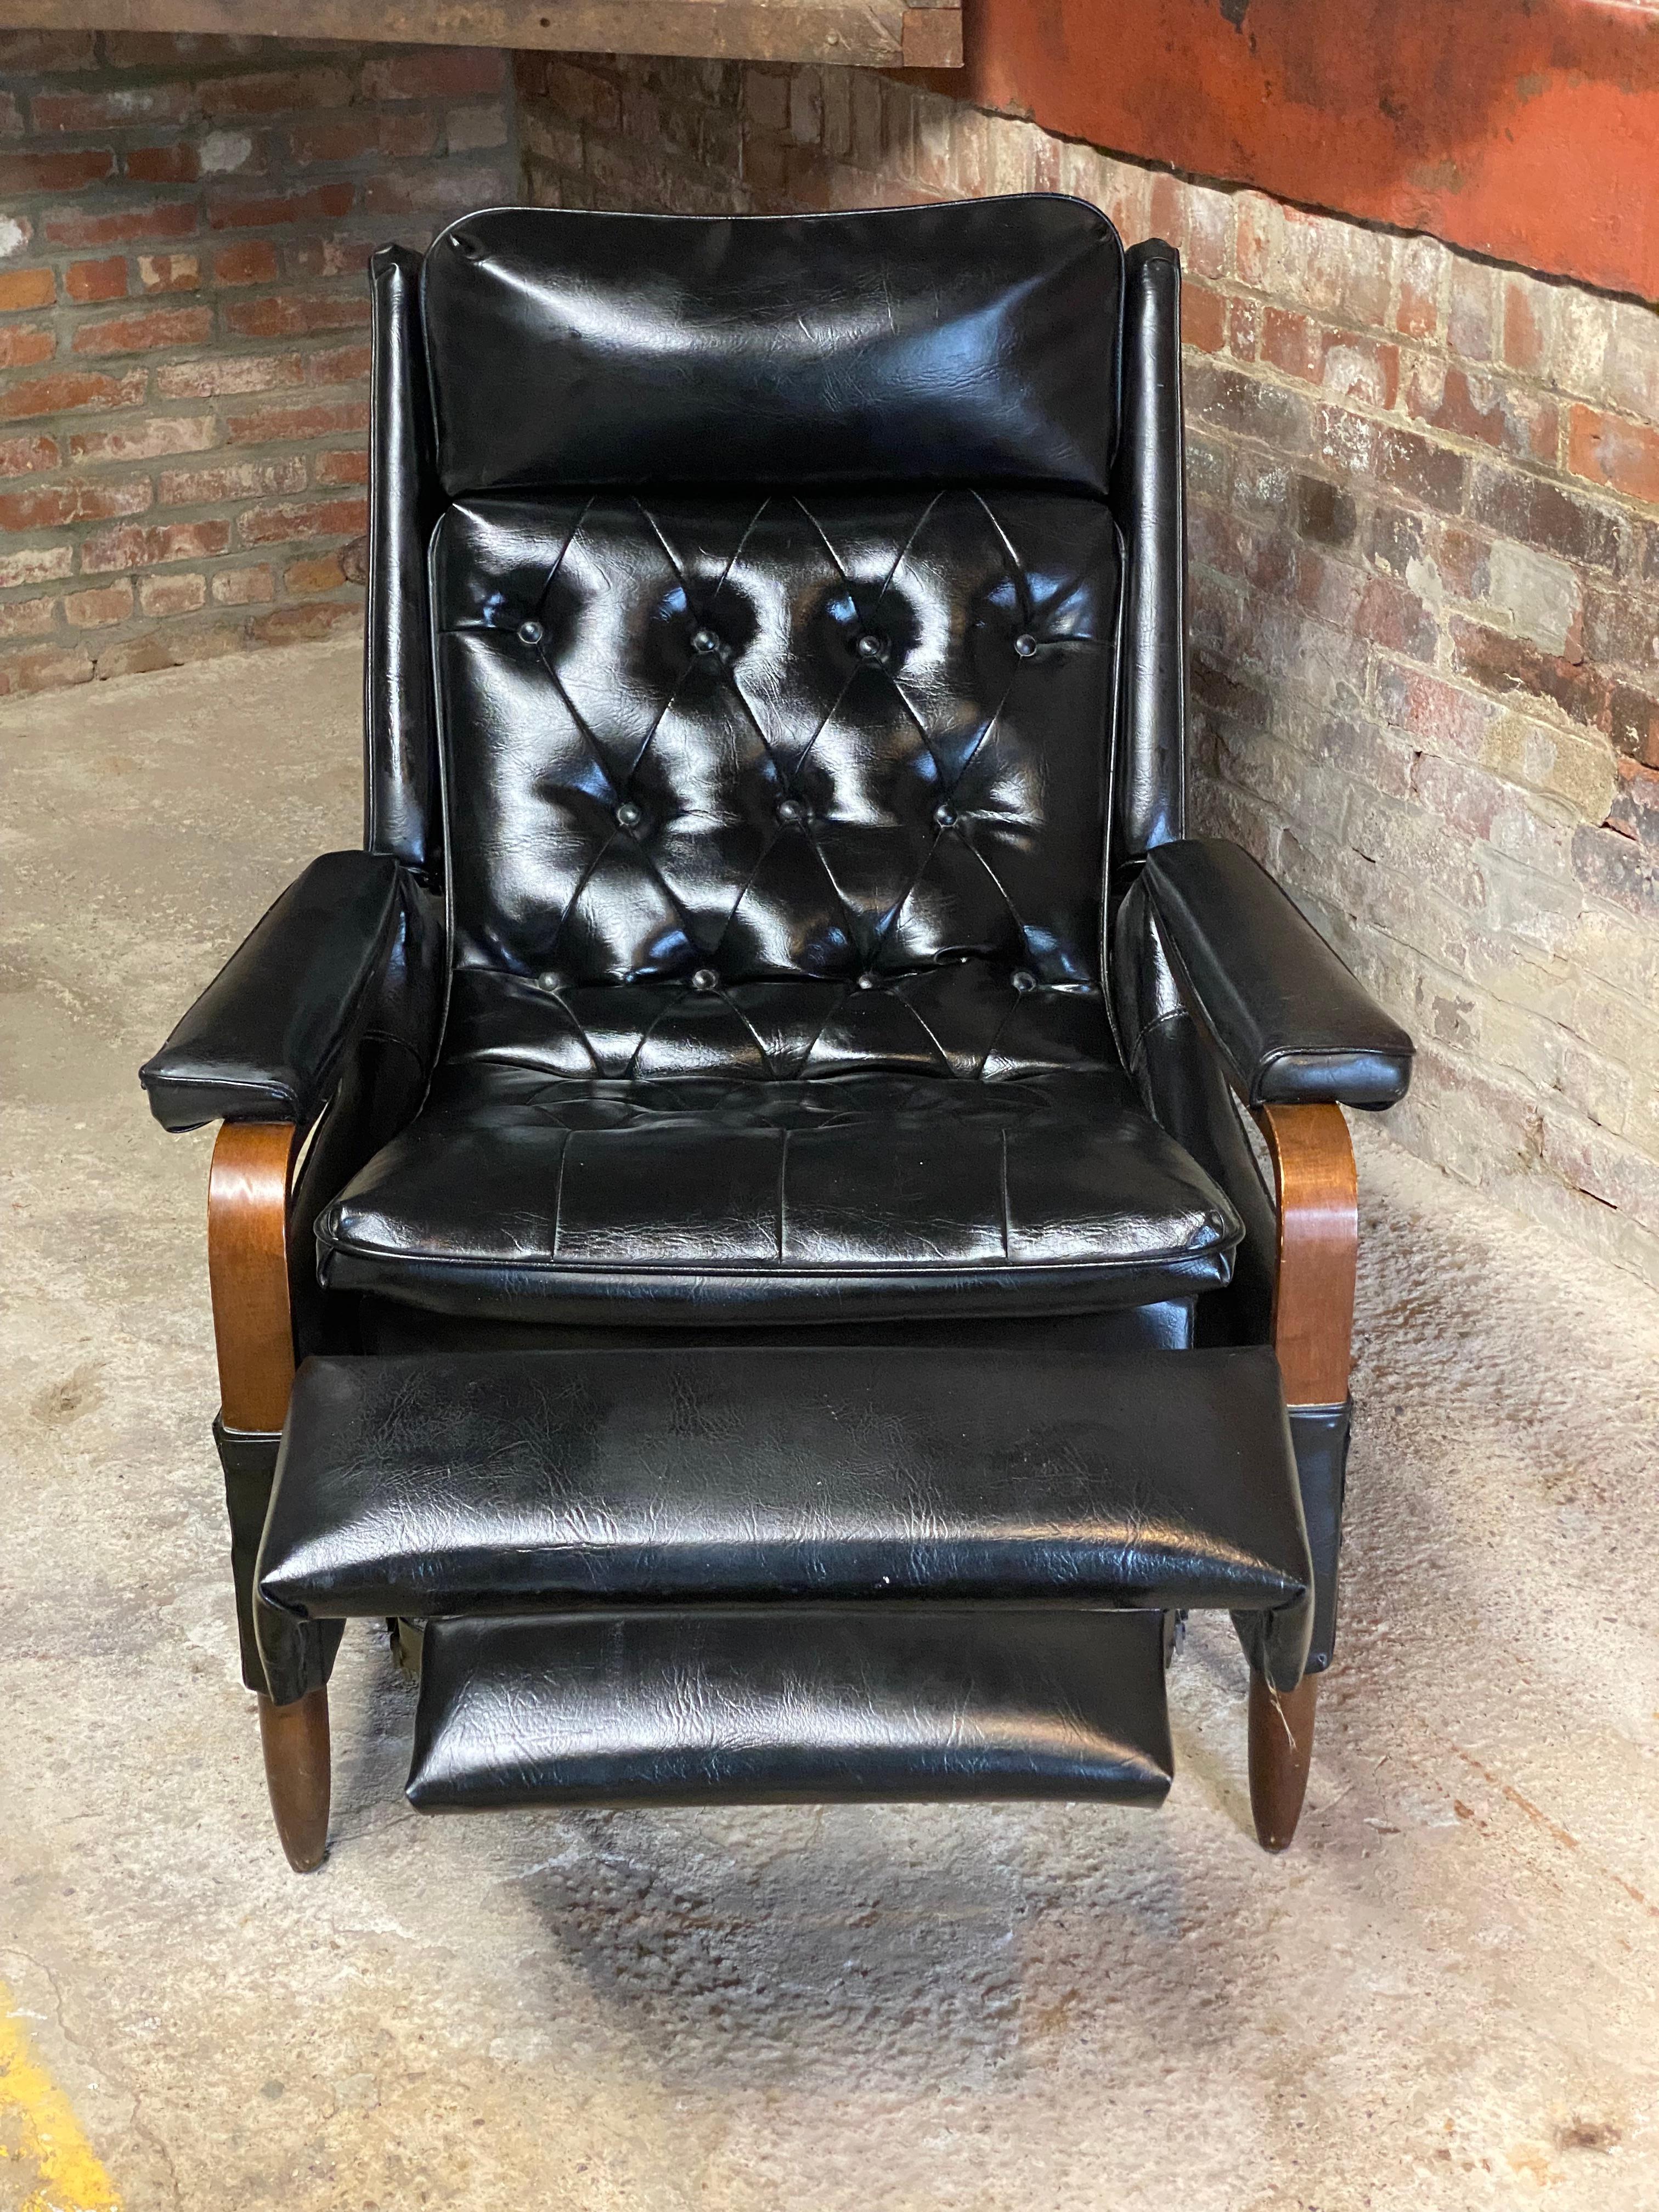 A truly comfortable and stylish chair. Circa 1960s bentwood arm with tufted and buttoned seat and back. Black vinyl upholstery. Nicely cushioned head and arm rests. Tapered and rounded wood legs. Great for the TV and movie binge watcher or the